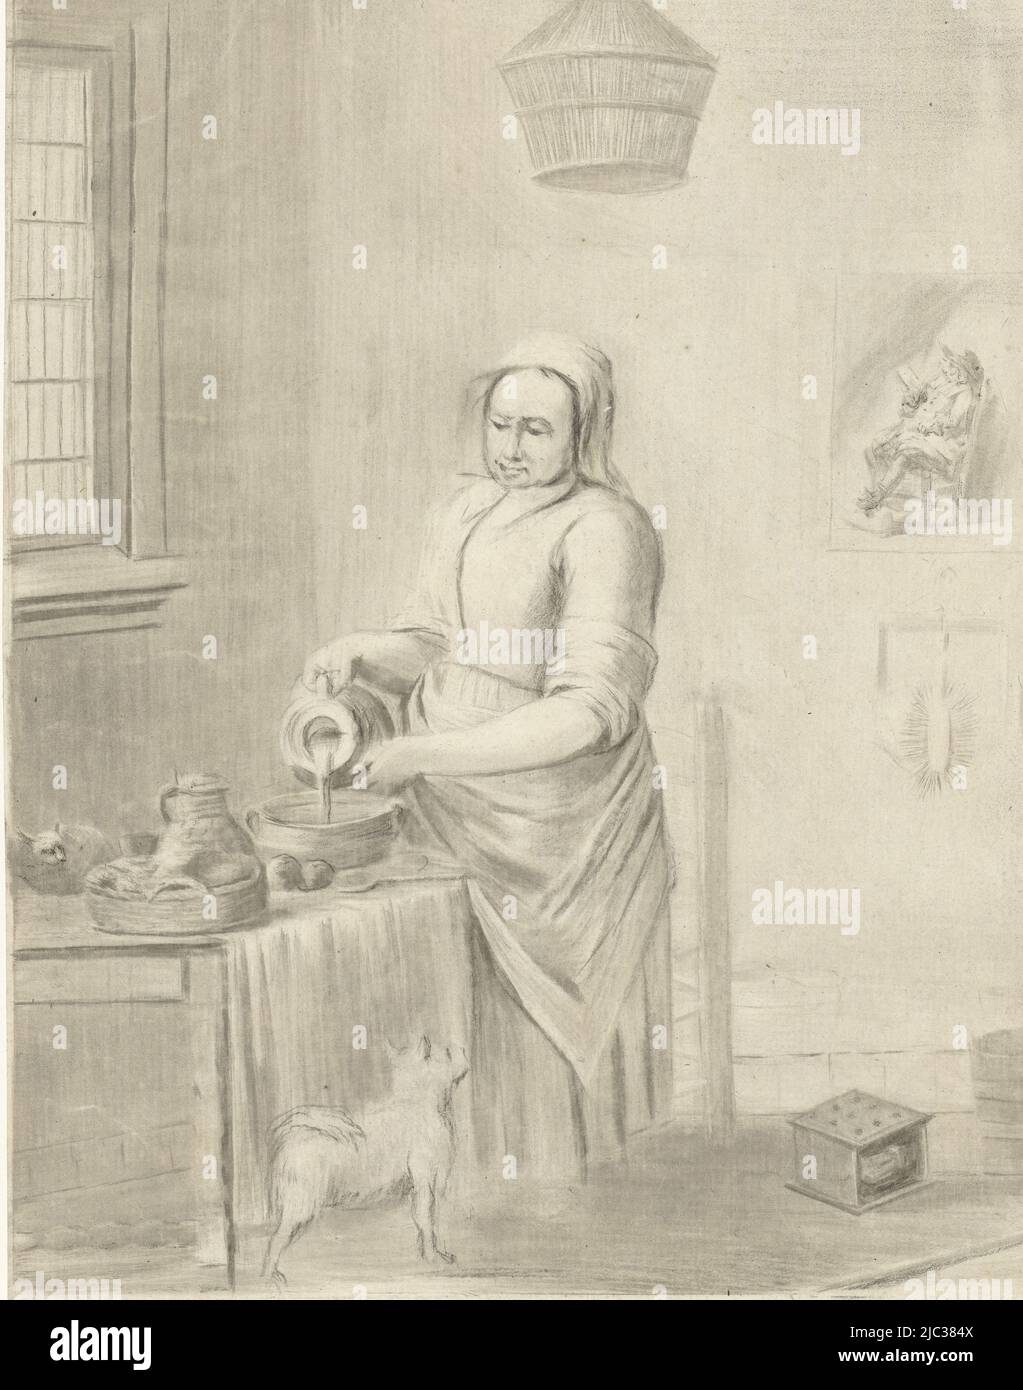 A maid stands behind a table pouring milk from a pitcher into a bowl. On the table is a basket of bread and a stone pitcher. A cat is sleeping on the table. On the left a window. At the bottom of the wall on the right a little stove. On the wall is a print of a man sitting on a chair. In the foreground a lapdog, The Milkmaid, print maker: Jurriaan Cootwijck, after: Johannes Vermeer, print maker: Amsterdam, after: Delft, 1724 - 1798, paper, w 236 mm × h 303 mm Stock Photo